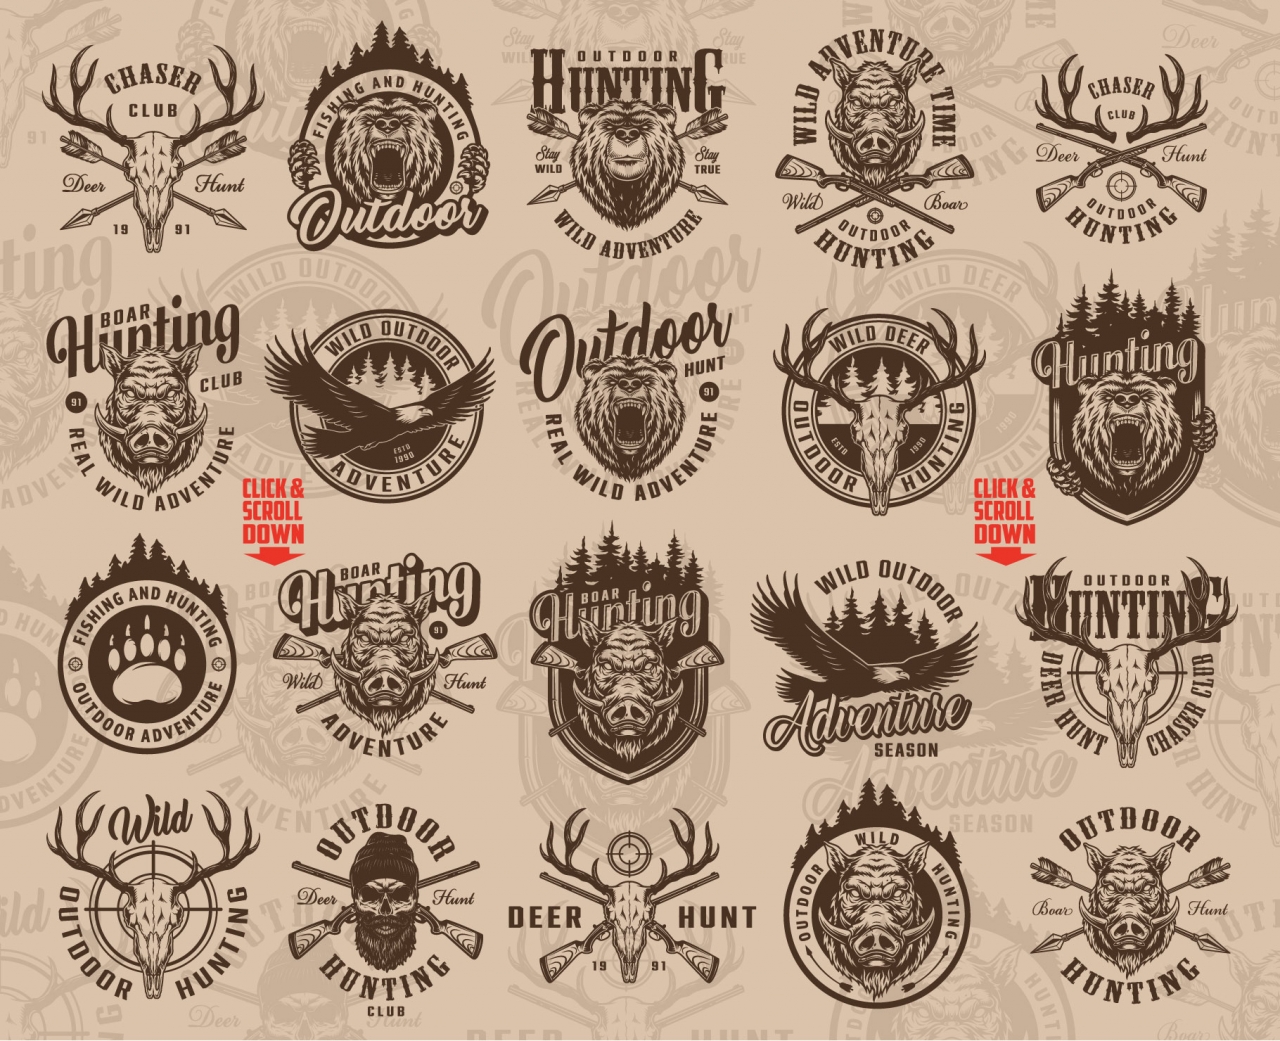 Old school style hunting badges collection with fishing and hunting monochrome style emblems, labels and prints on light background